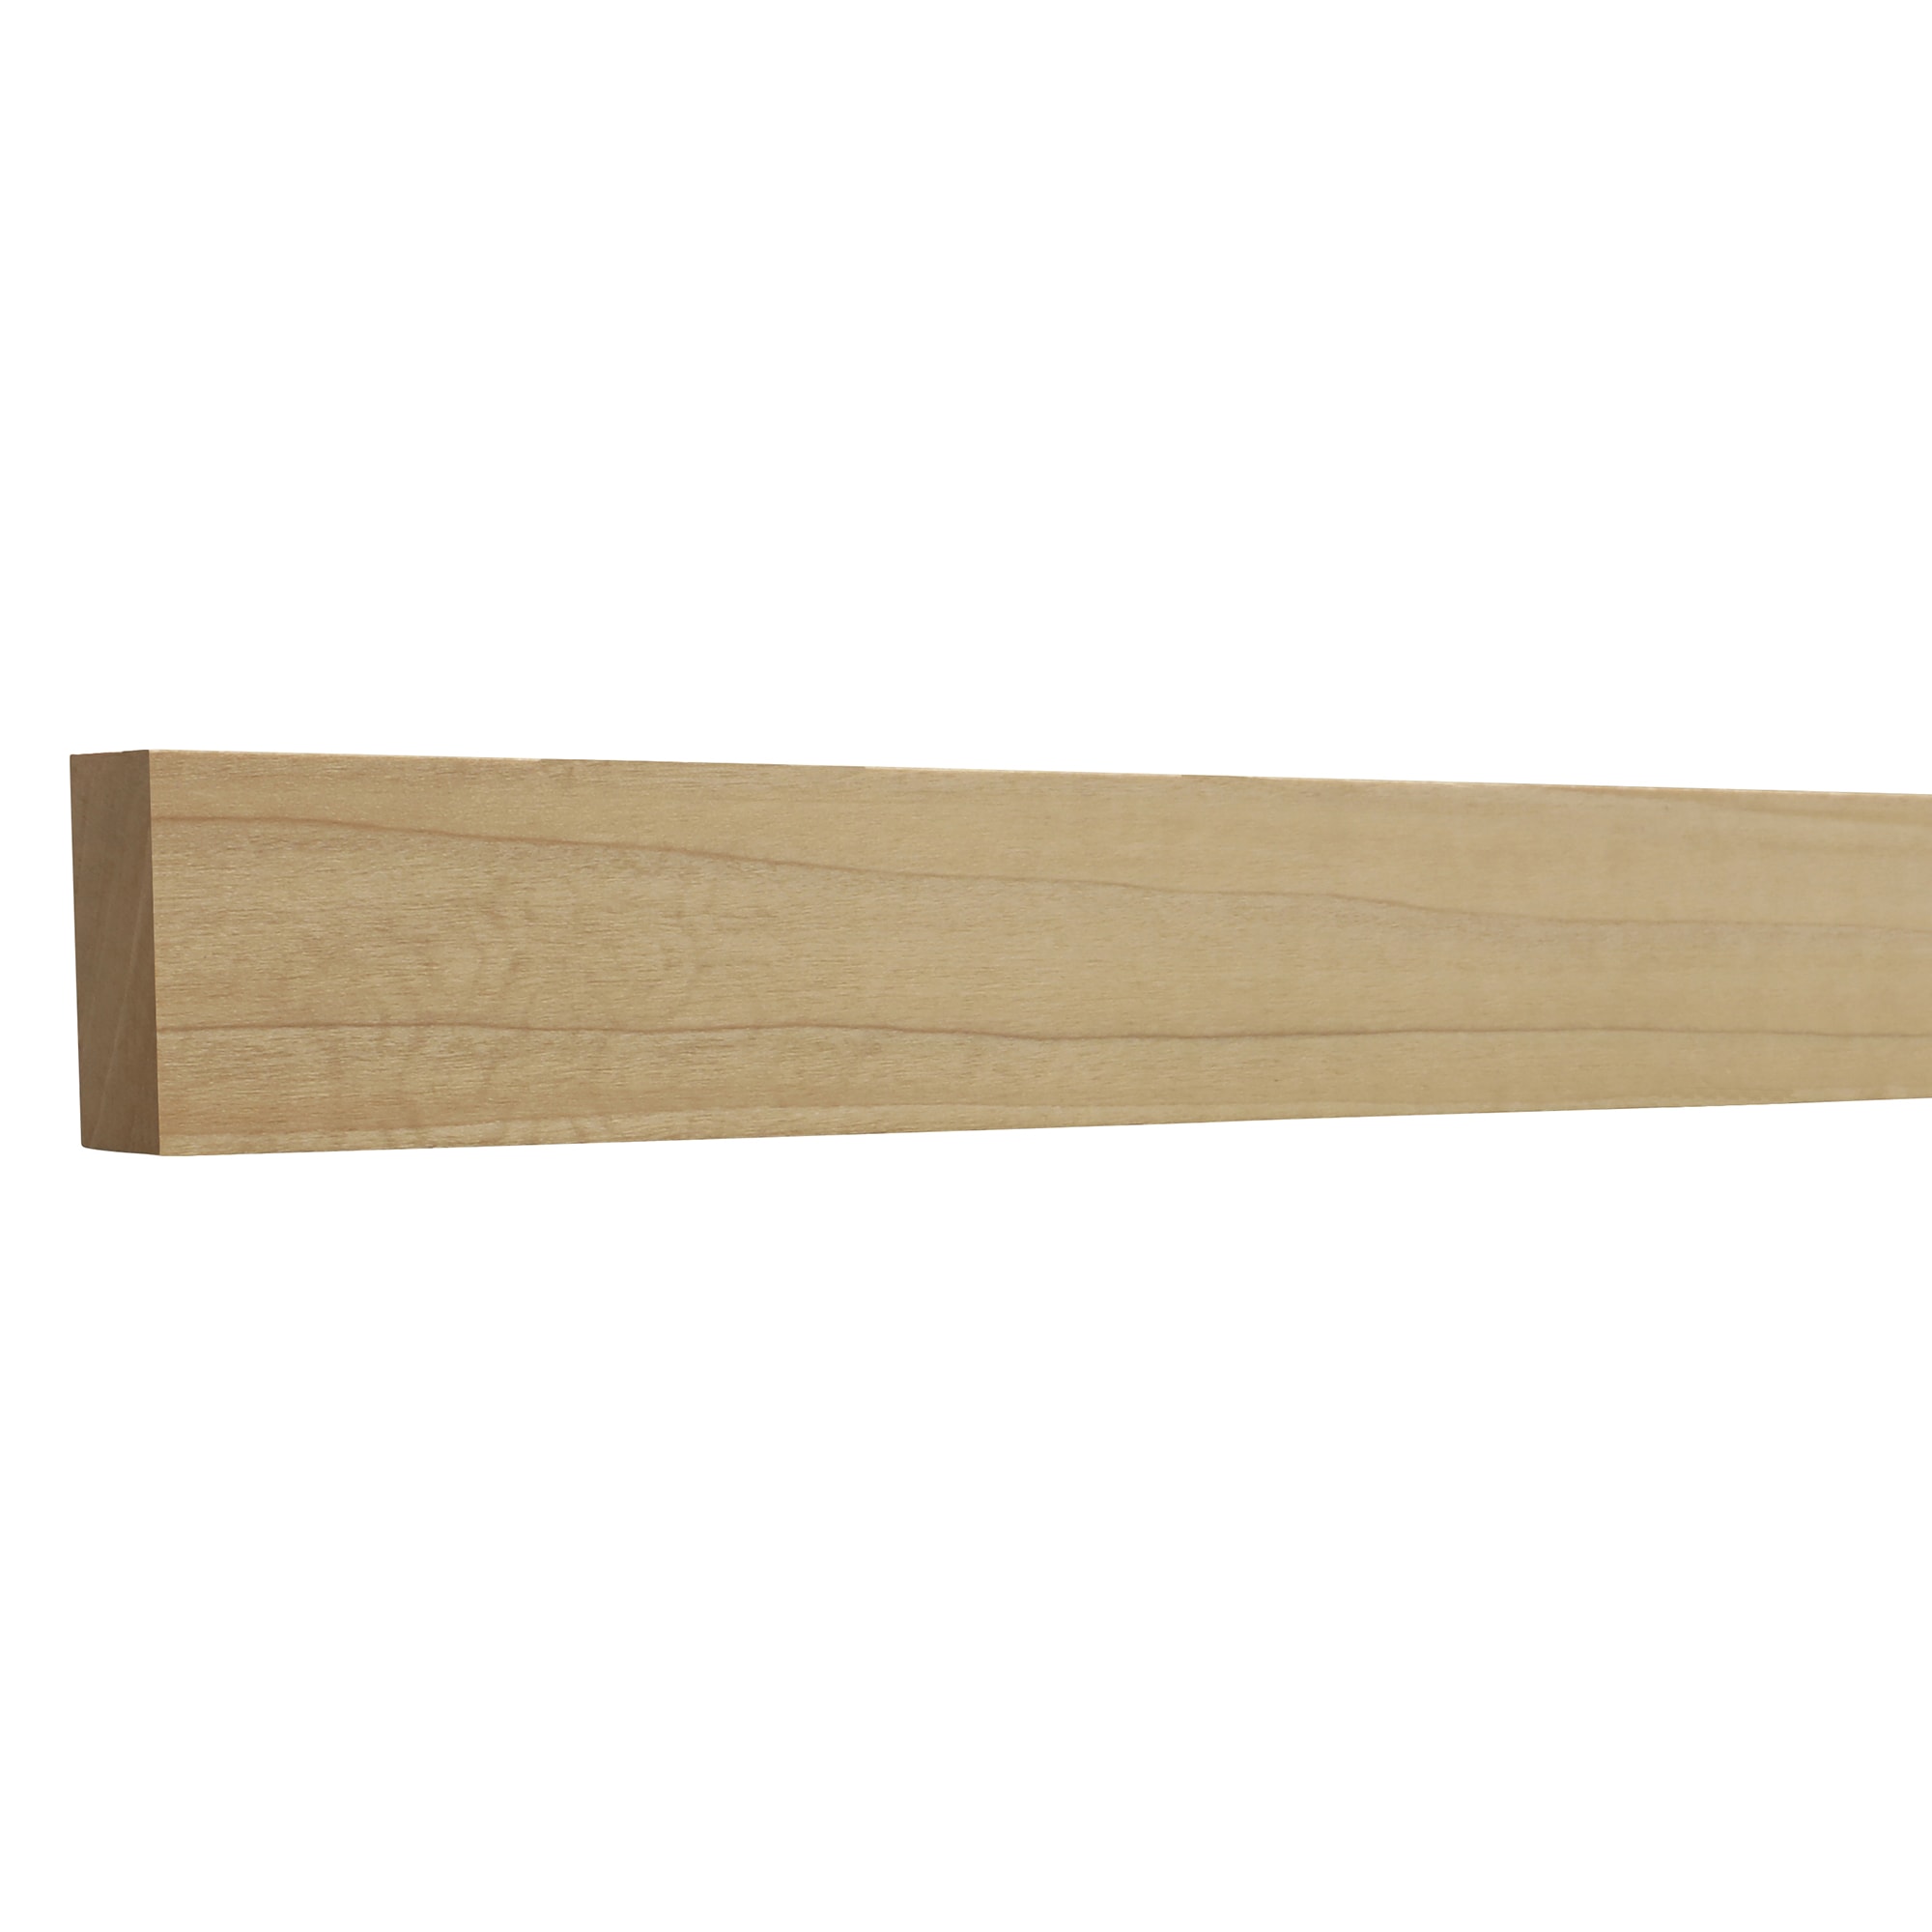 Poplar 4 Ft Appearance Boards At